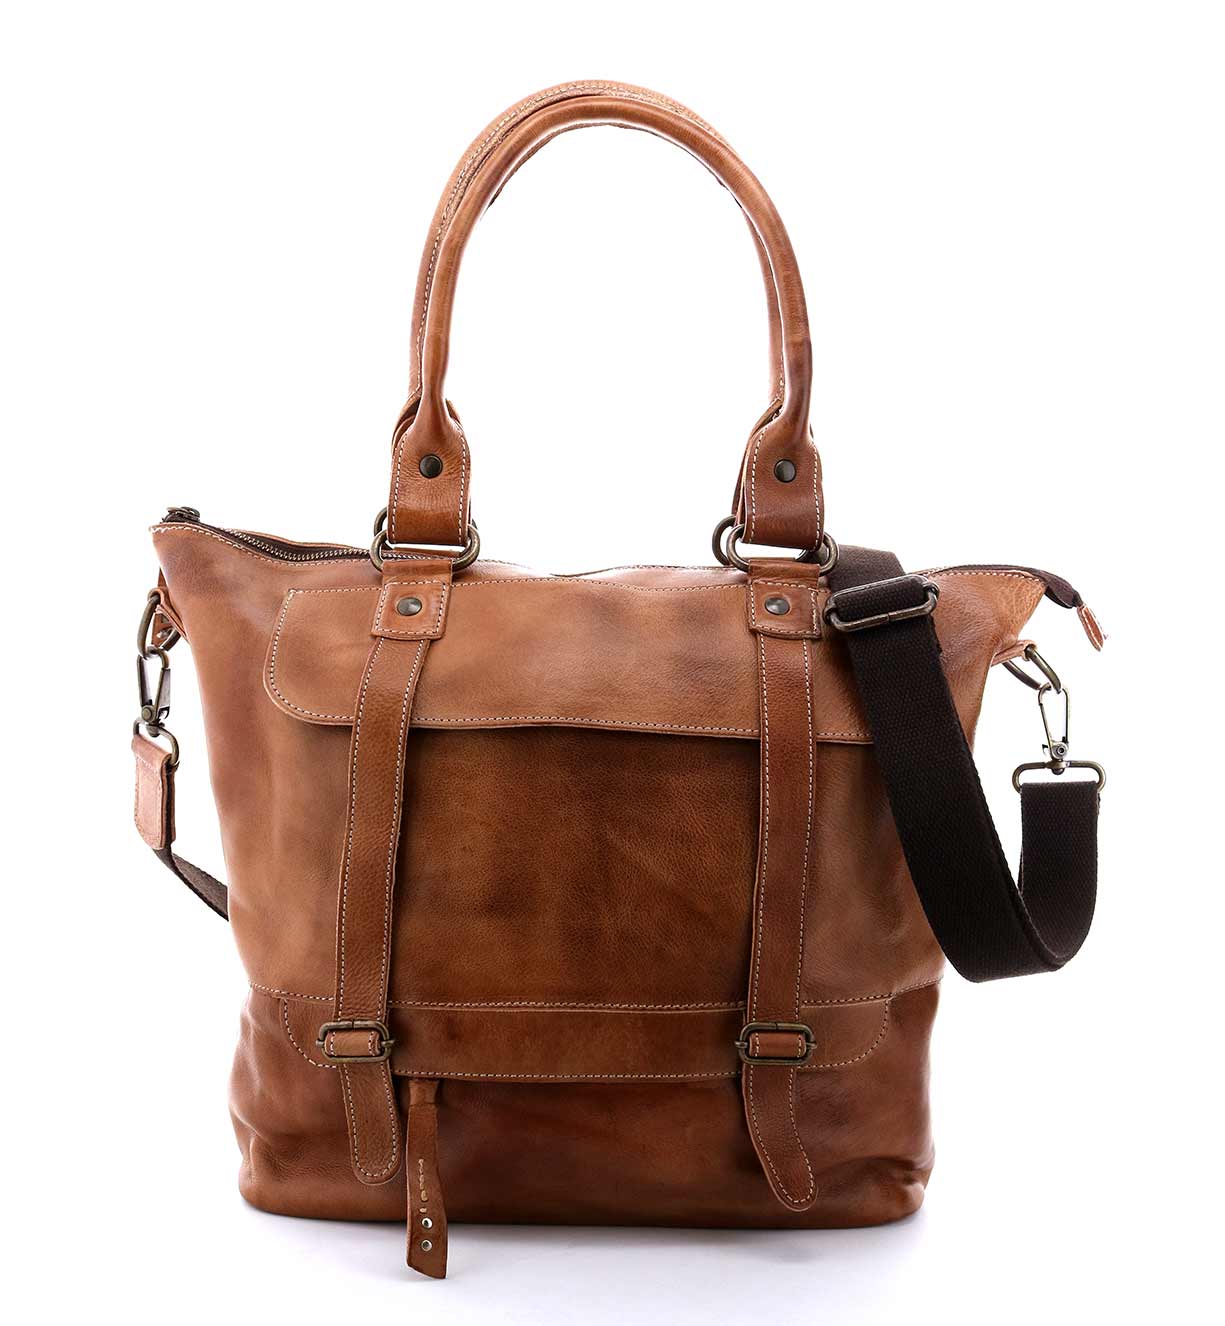 A Big Fork by Bed Stu brown leather tote bag with straps.